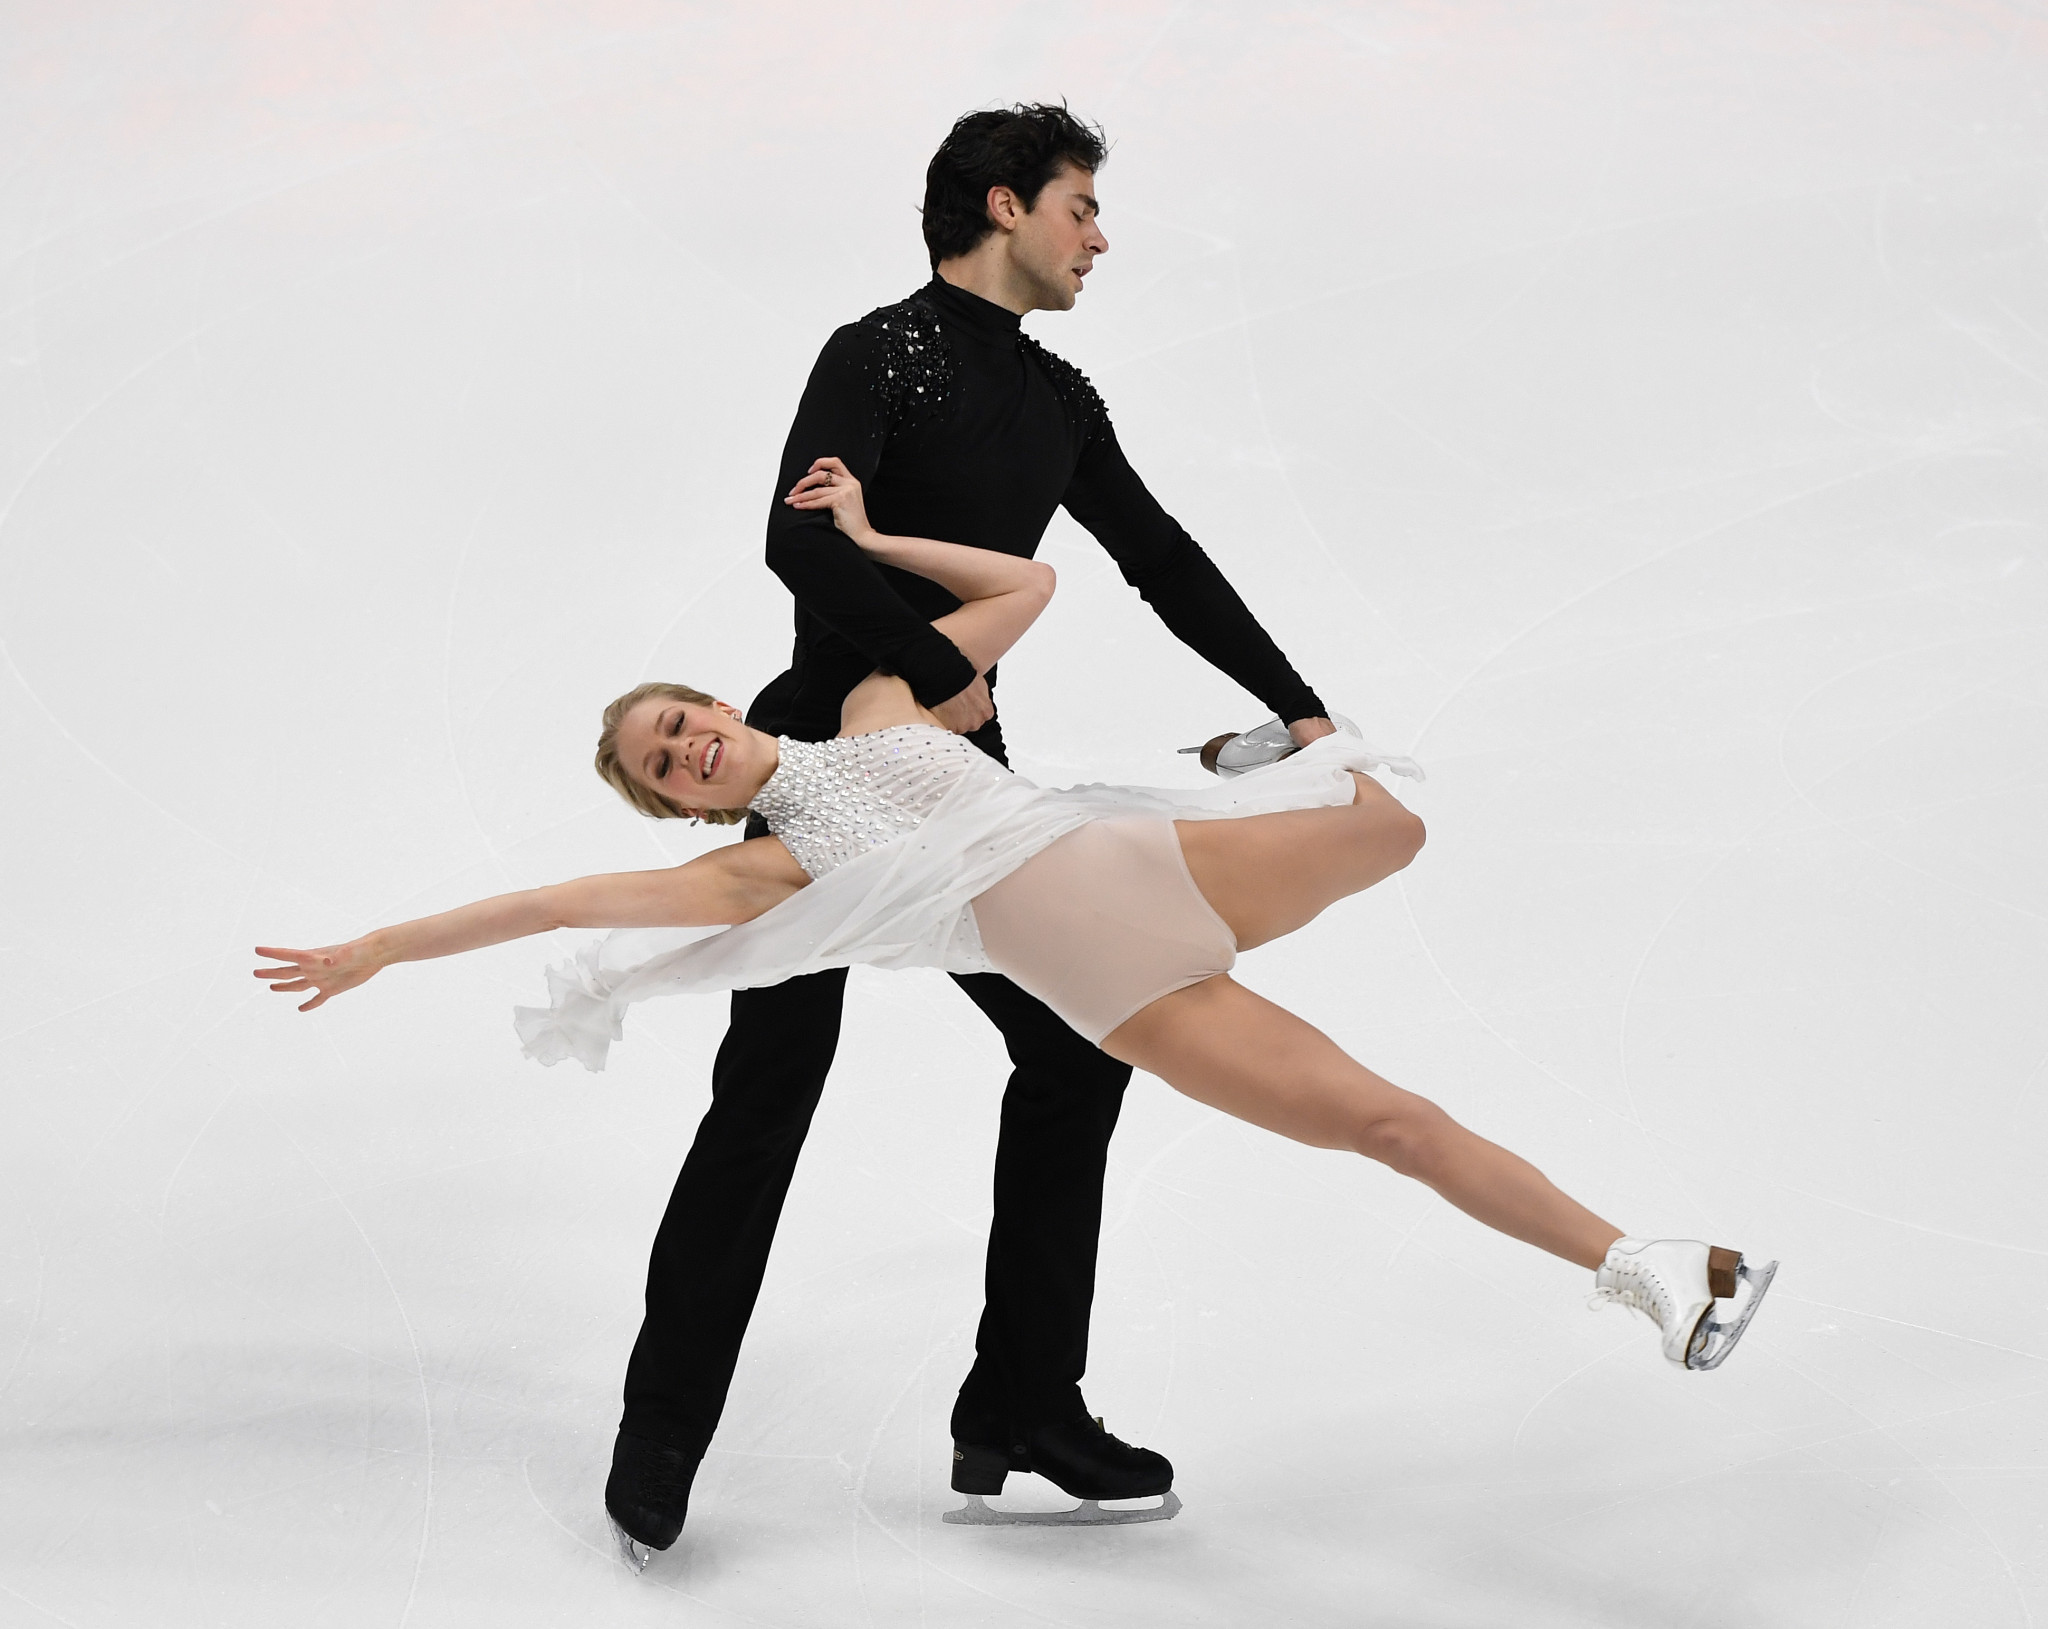 Kaitlyn Weaver and Andrew Poje claimed the silver medal in Anaheim ©Getty Images